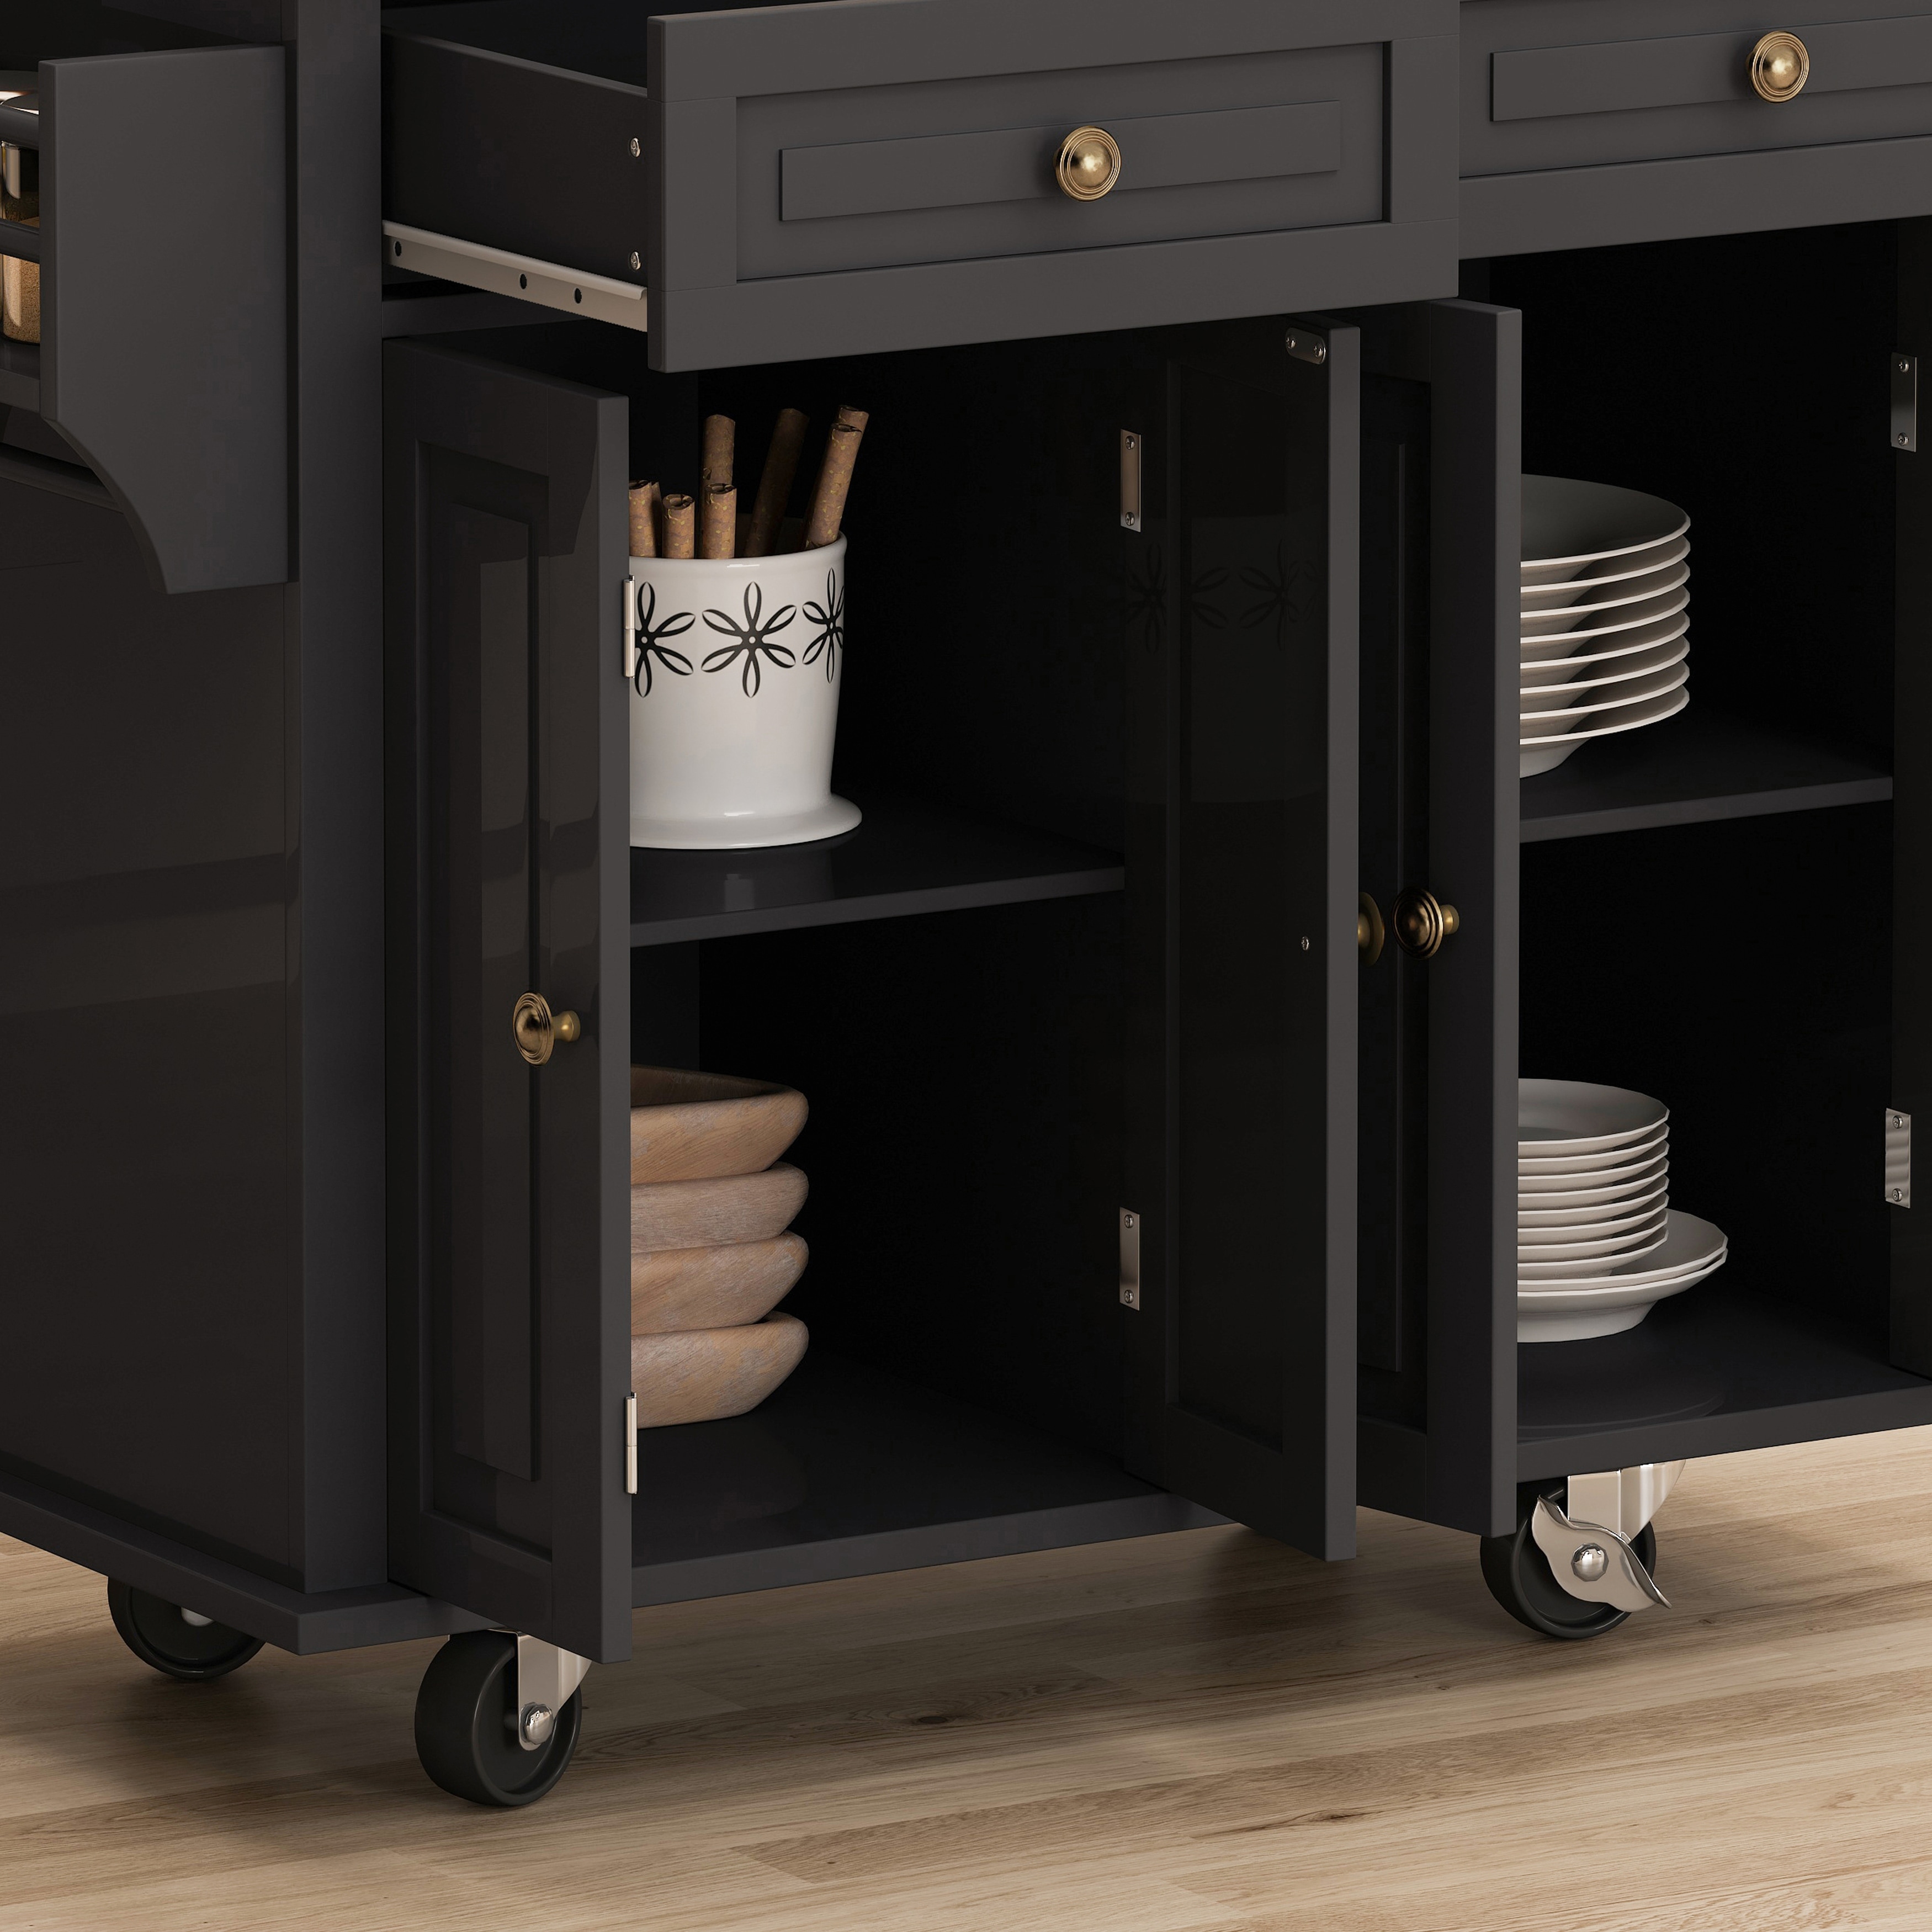 43.31 Inch Kitchen Island Cart with 4 Door Cabinet and Two Drawers（Black）